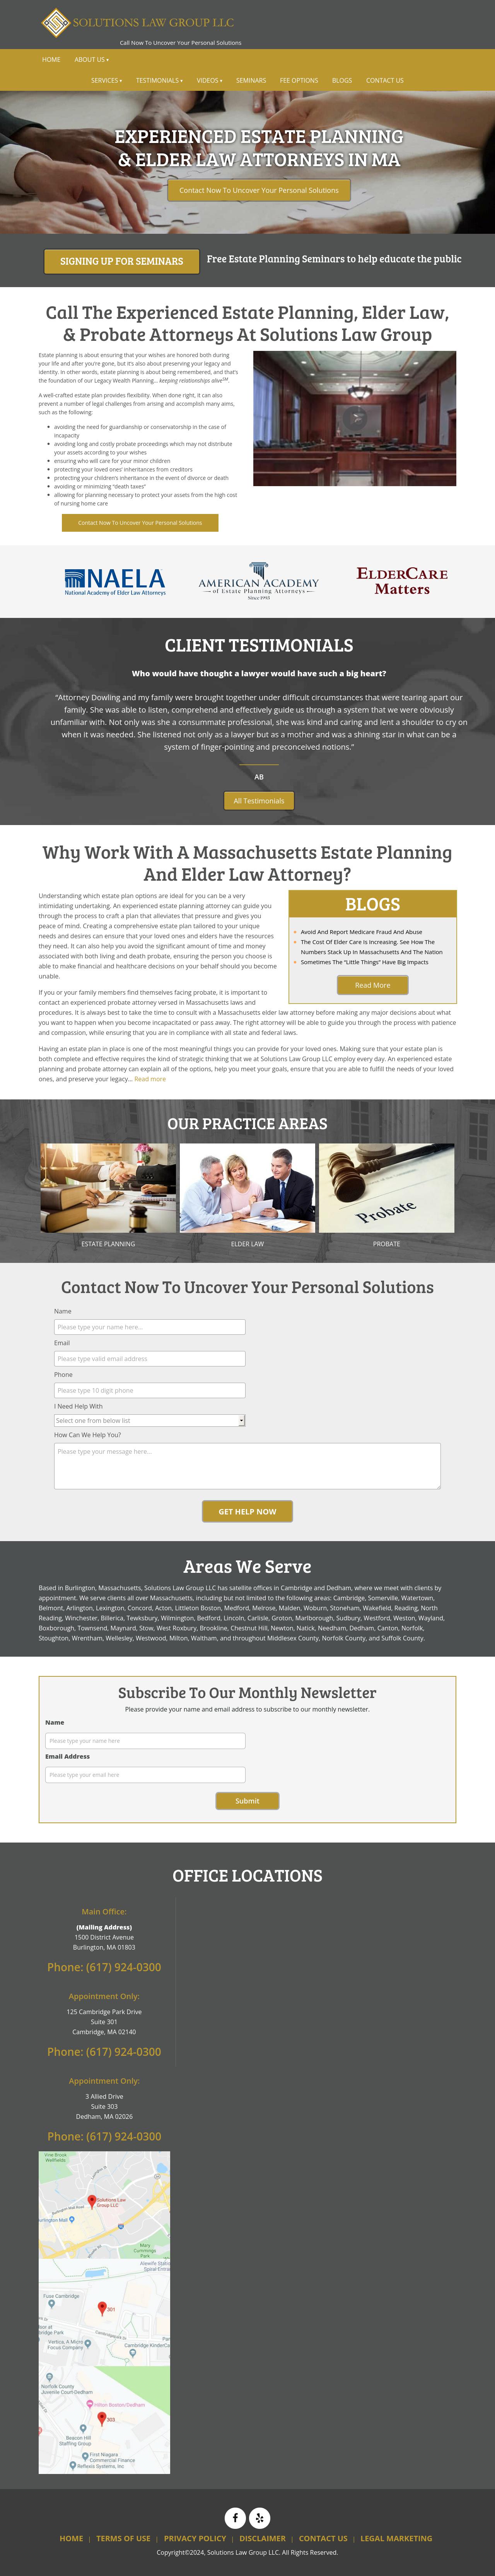 Solutions Law Group LLC - Cambridge MA Lawyers